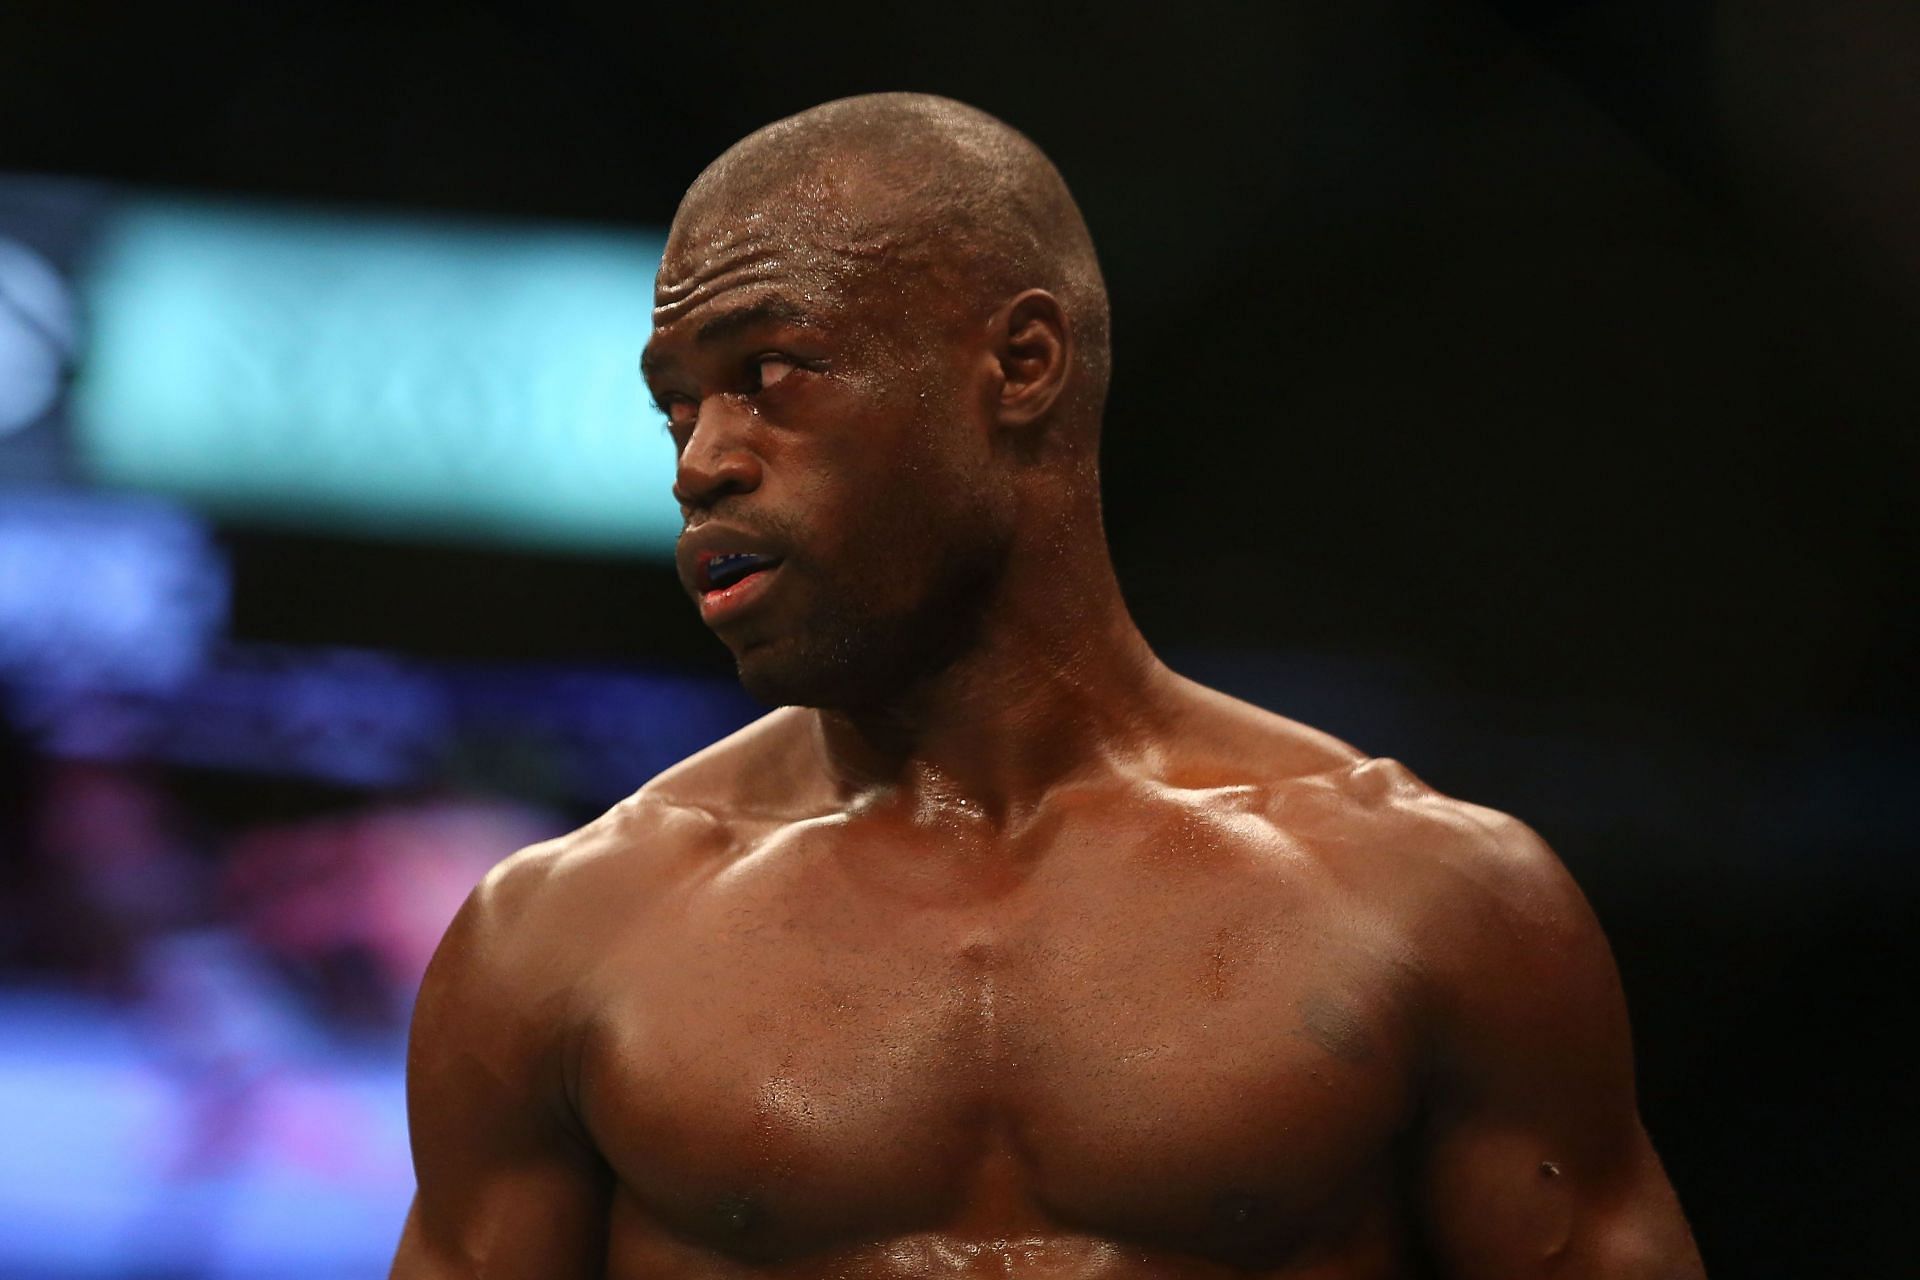 Uriah Hall opens up about depression